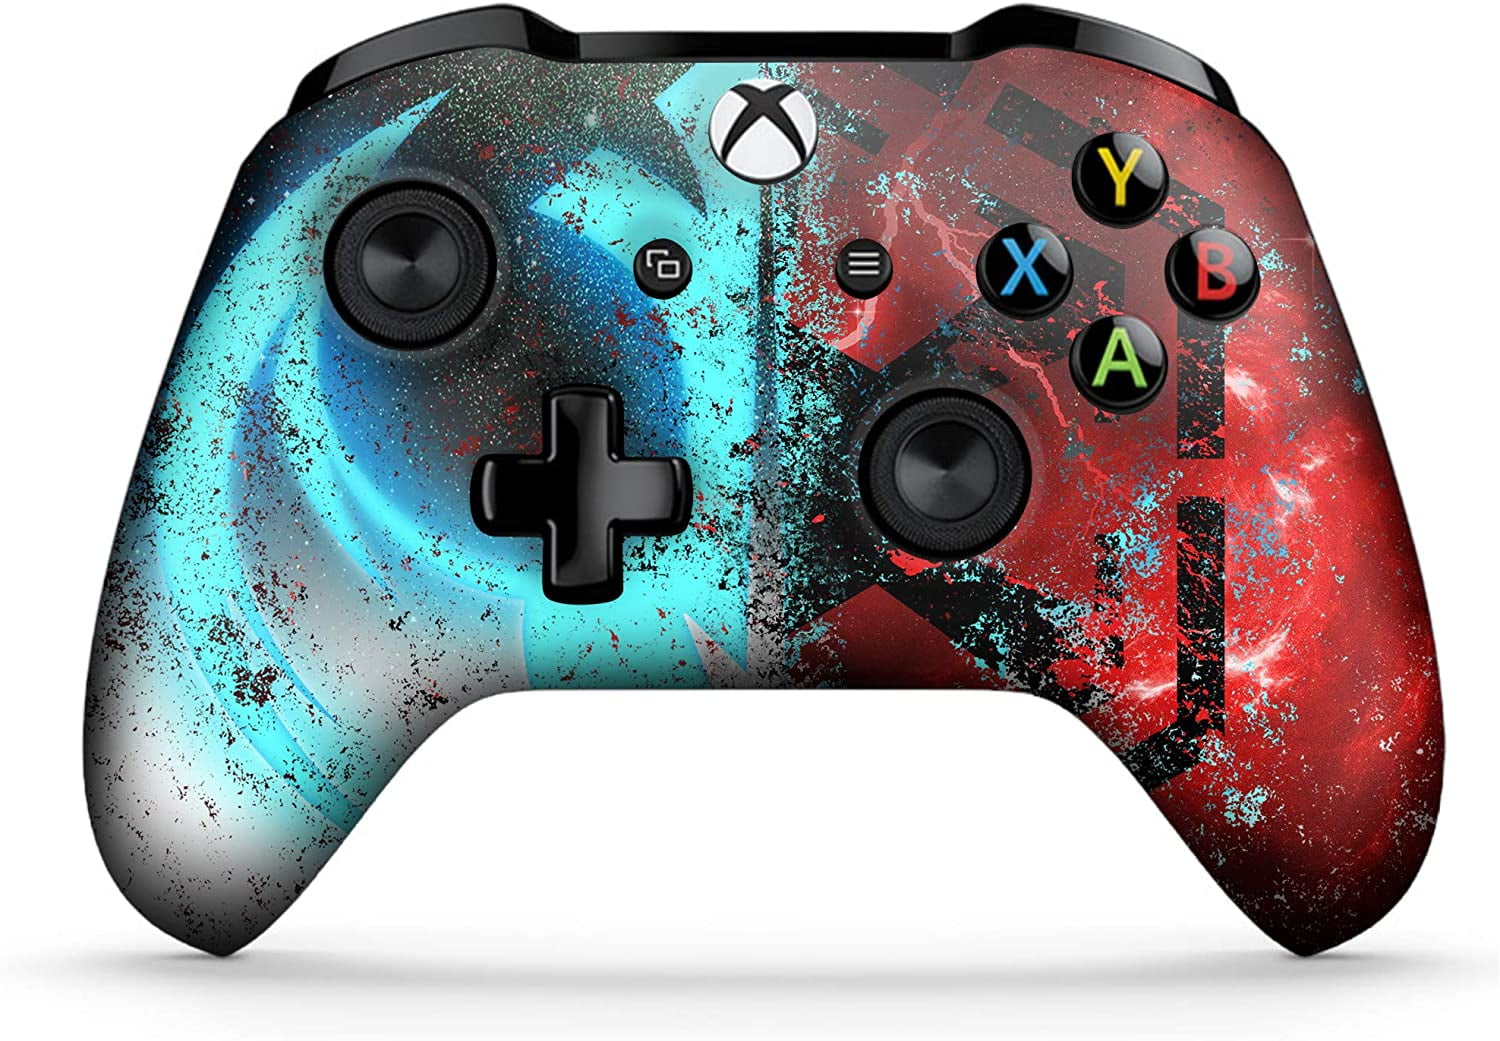 Search results for: 'create your own aimbot controller